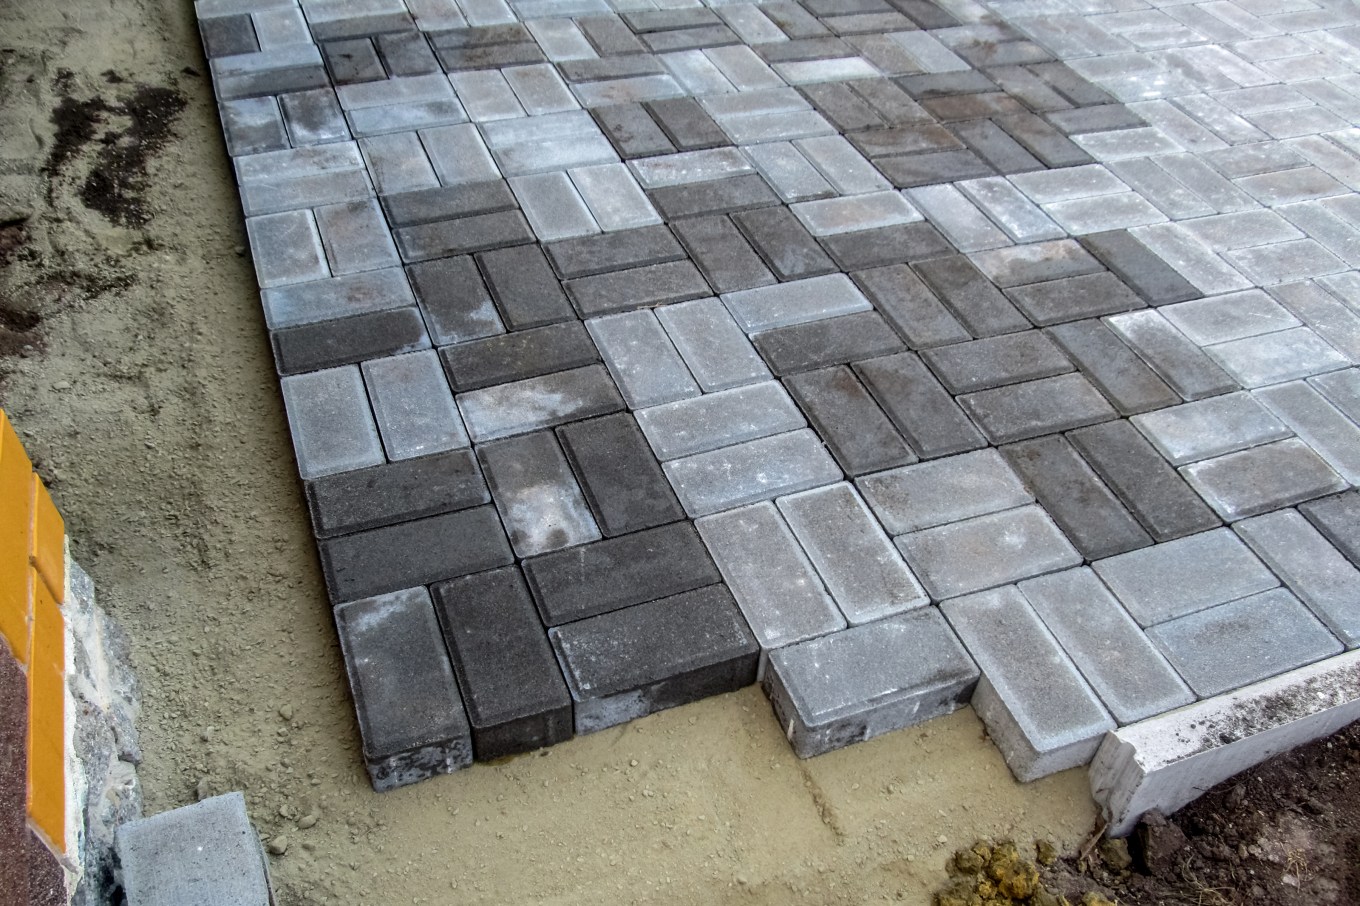 Brick paving slabs form a concrete patio with alternating colors.